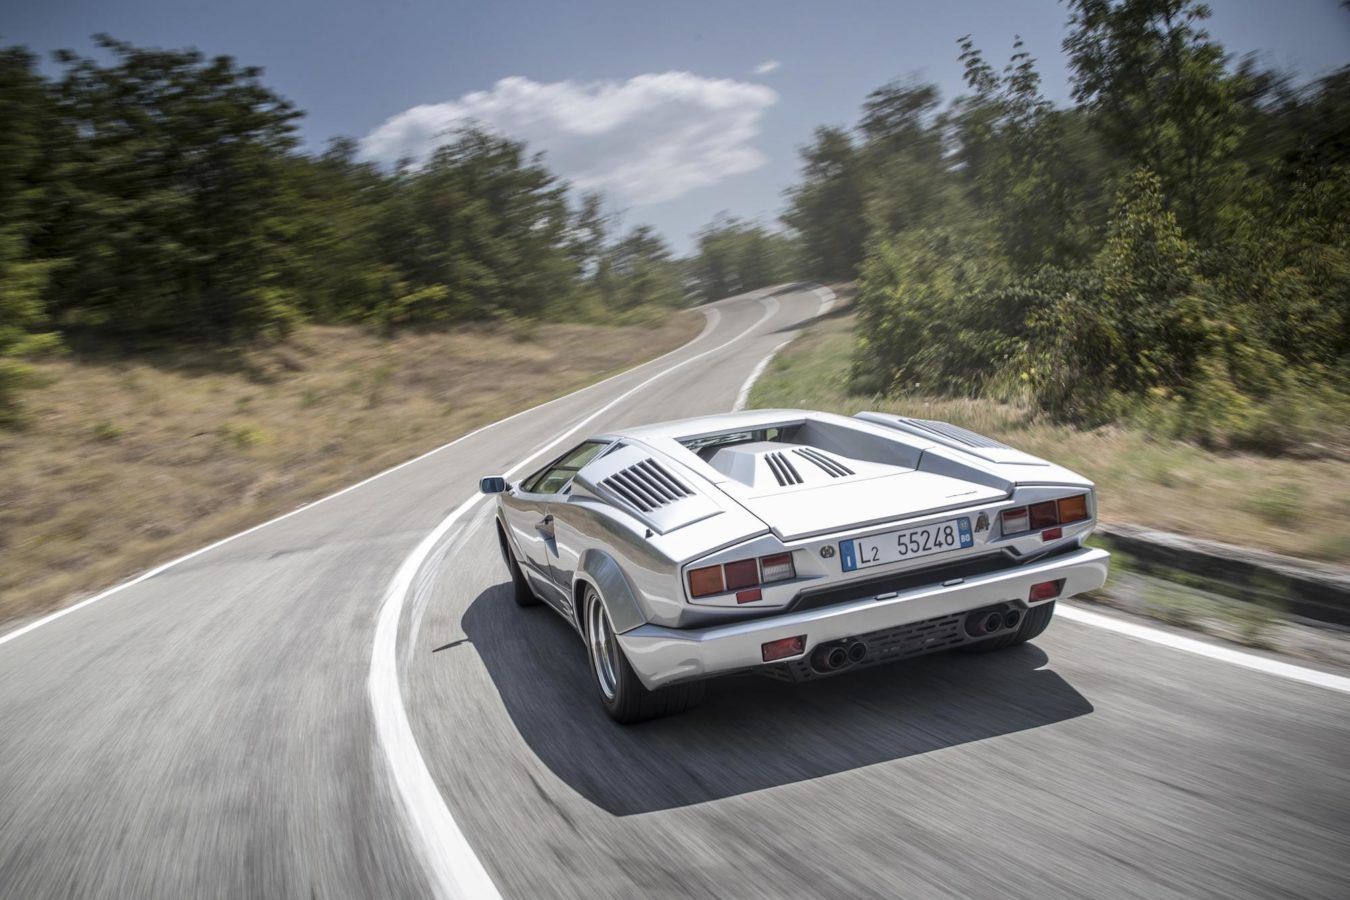 Why the Lamborghini Countach is one of the most important cars ever made